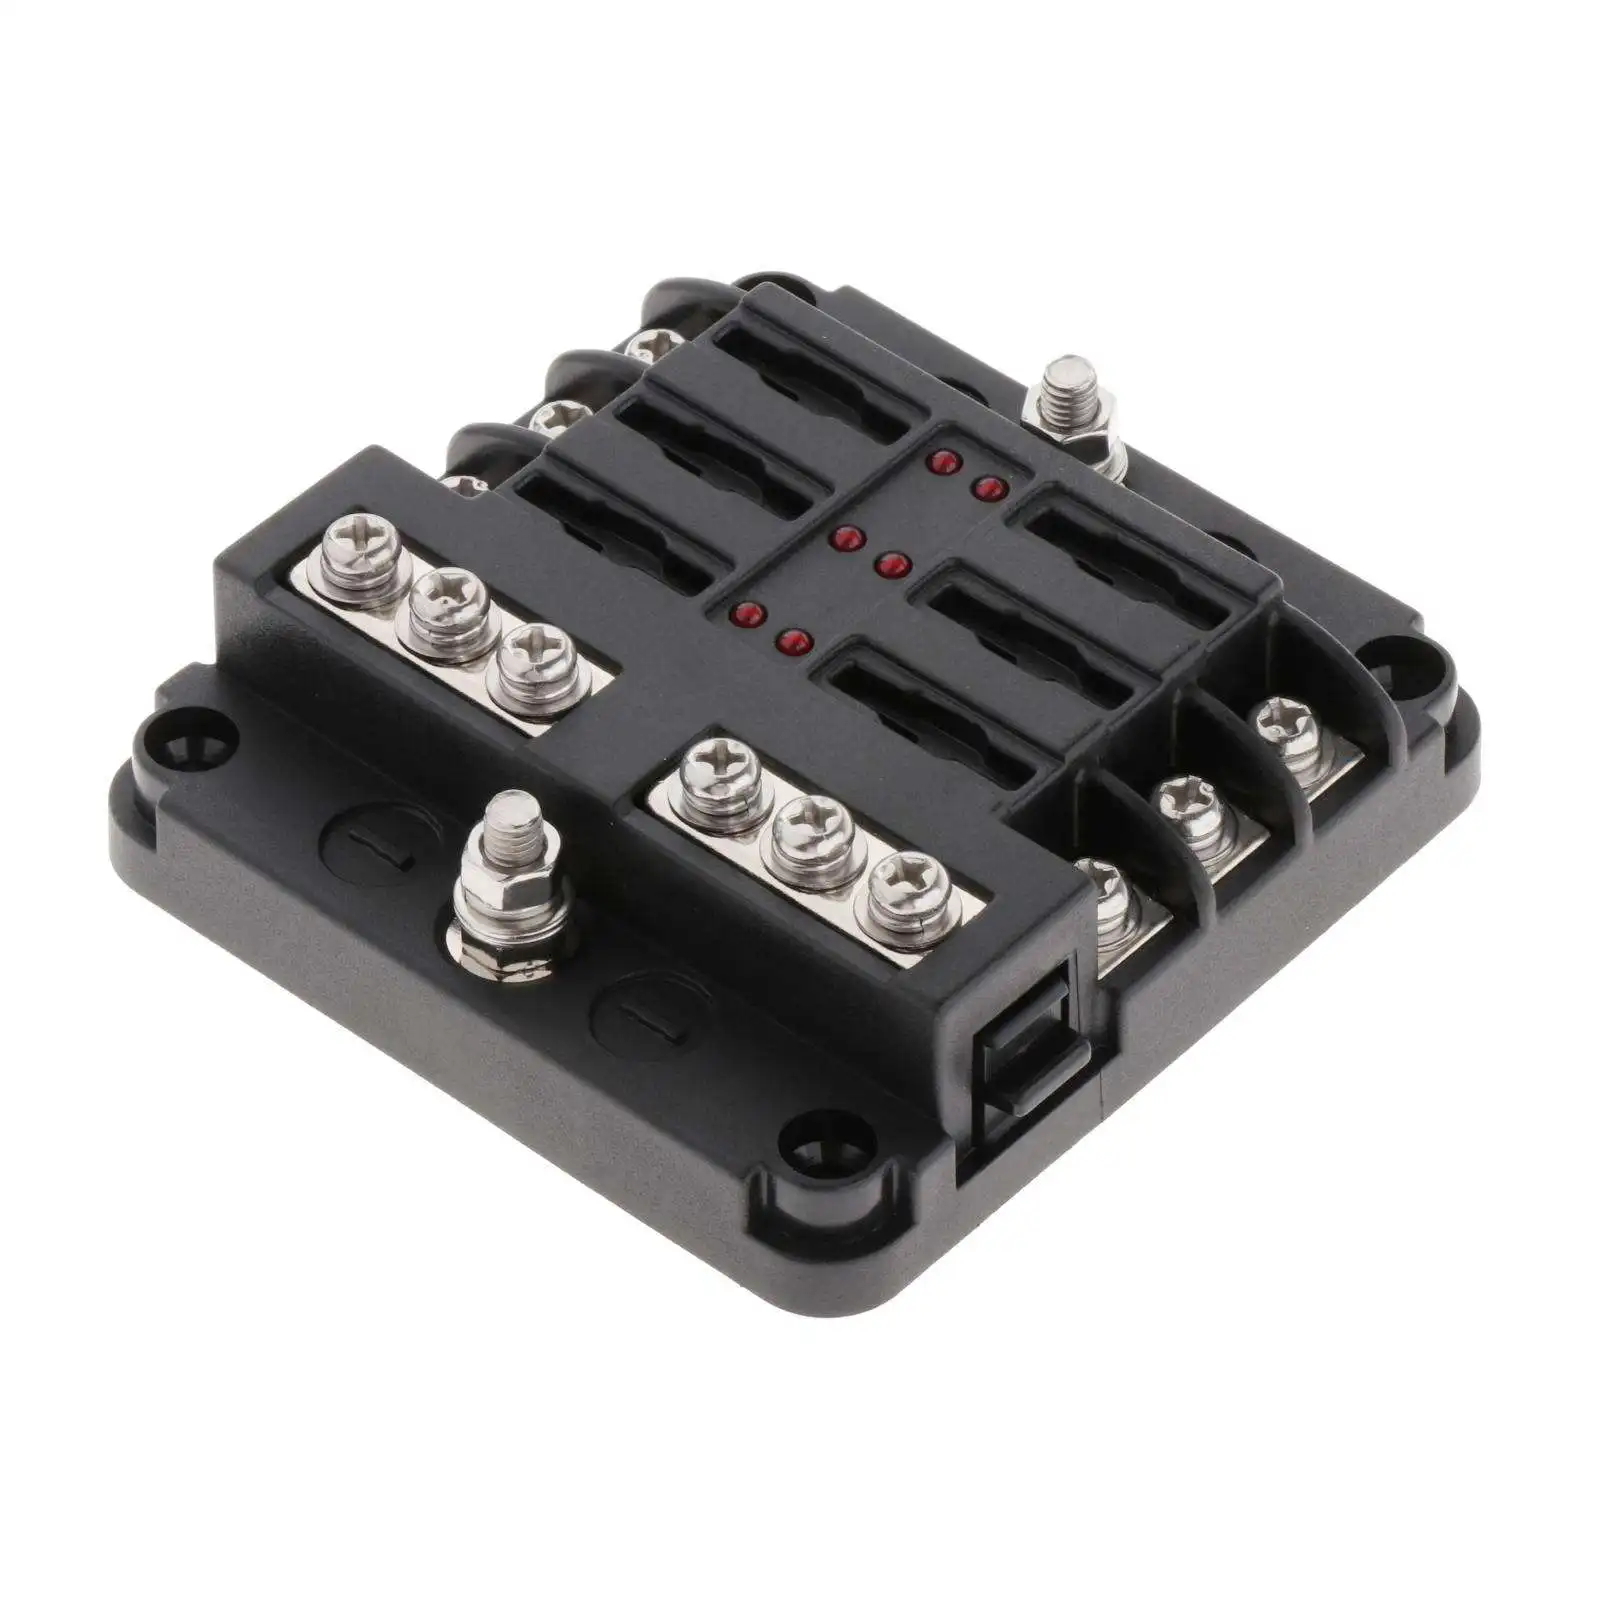 Car LED Fuse Box PBT with Protection Cover Damp-Proof Atc/Ato 6 Way Blade Fuse Block Fit for ship Automotive Yacht Truck RV Van